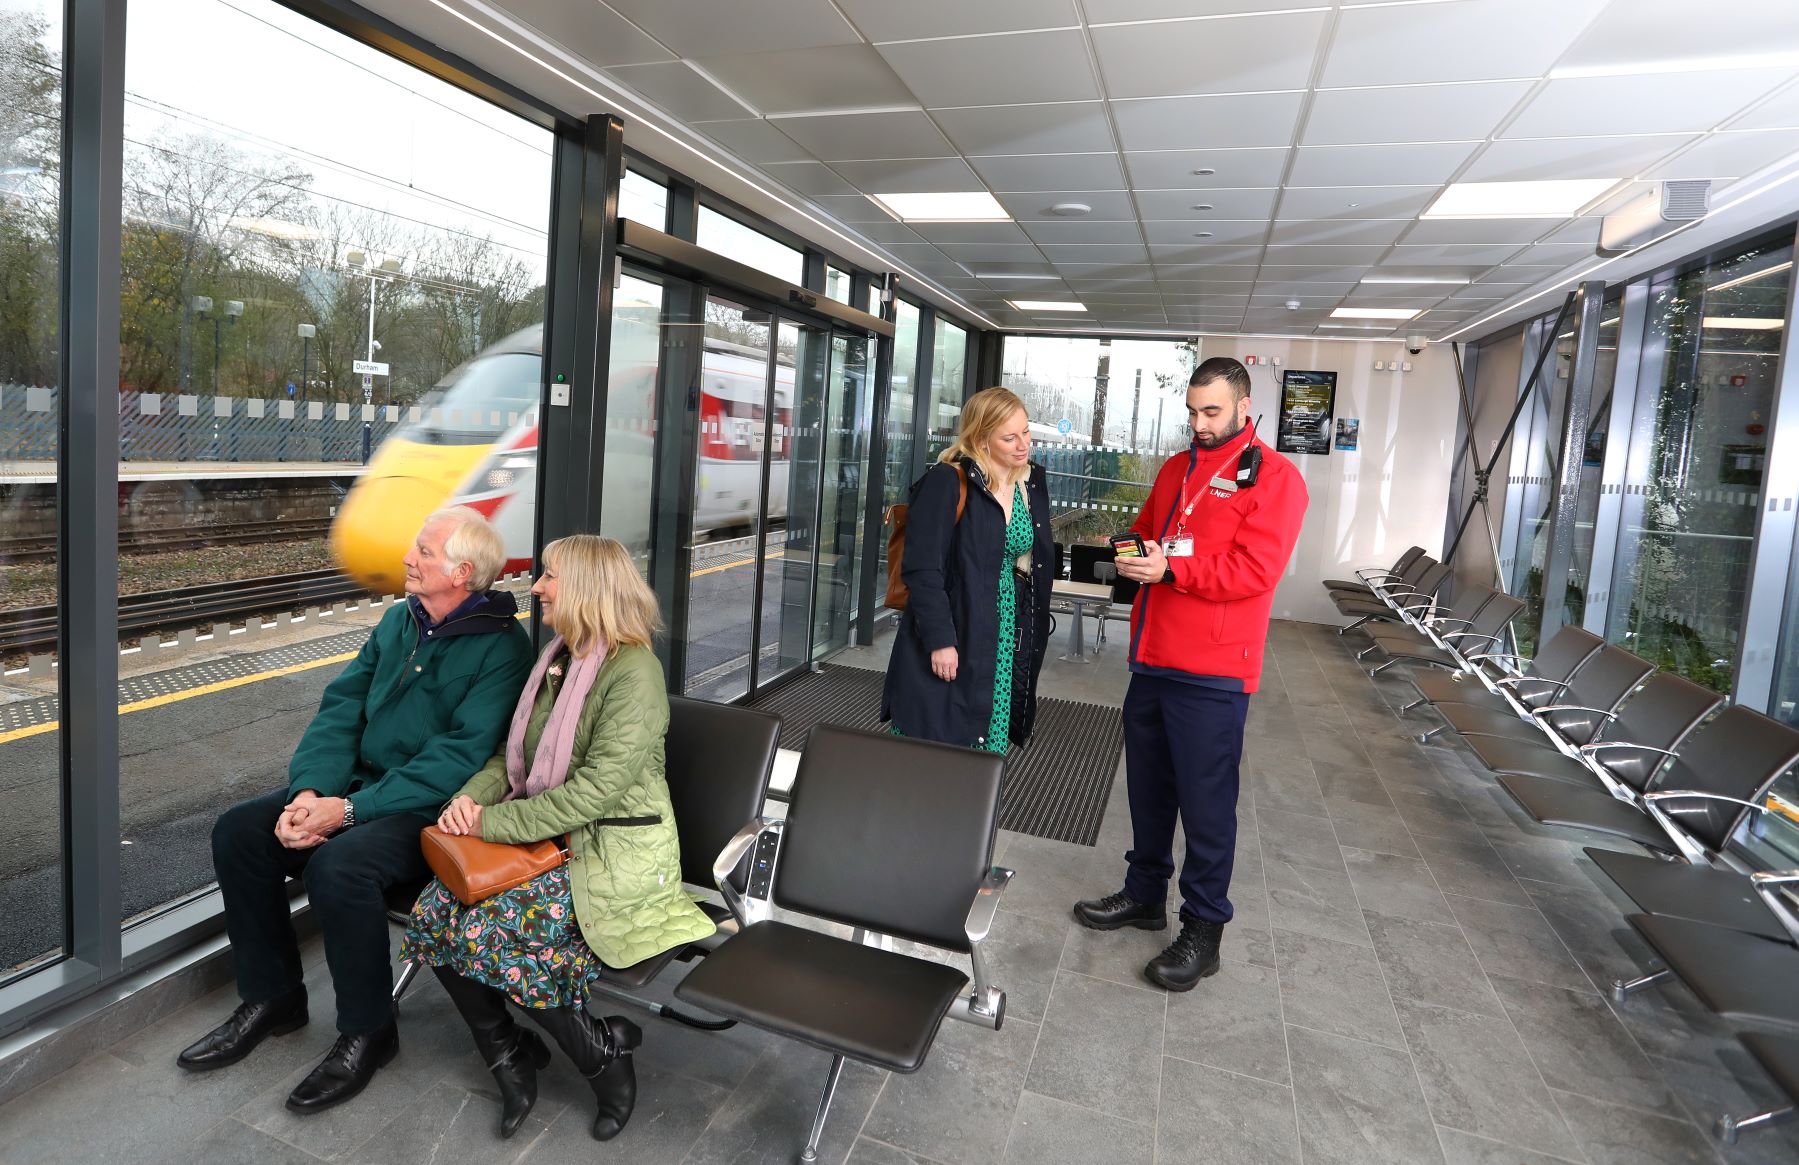 The Wait Is Over As New Waiting Rooms Open At Durham Station